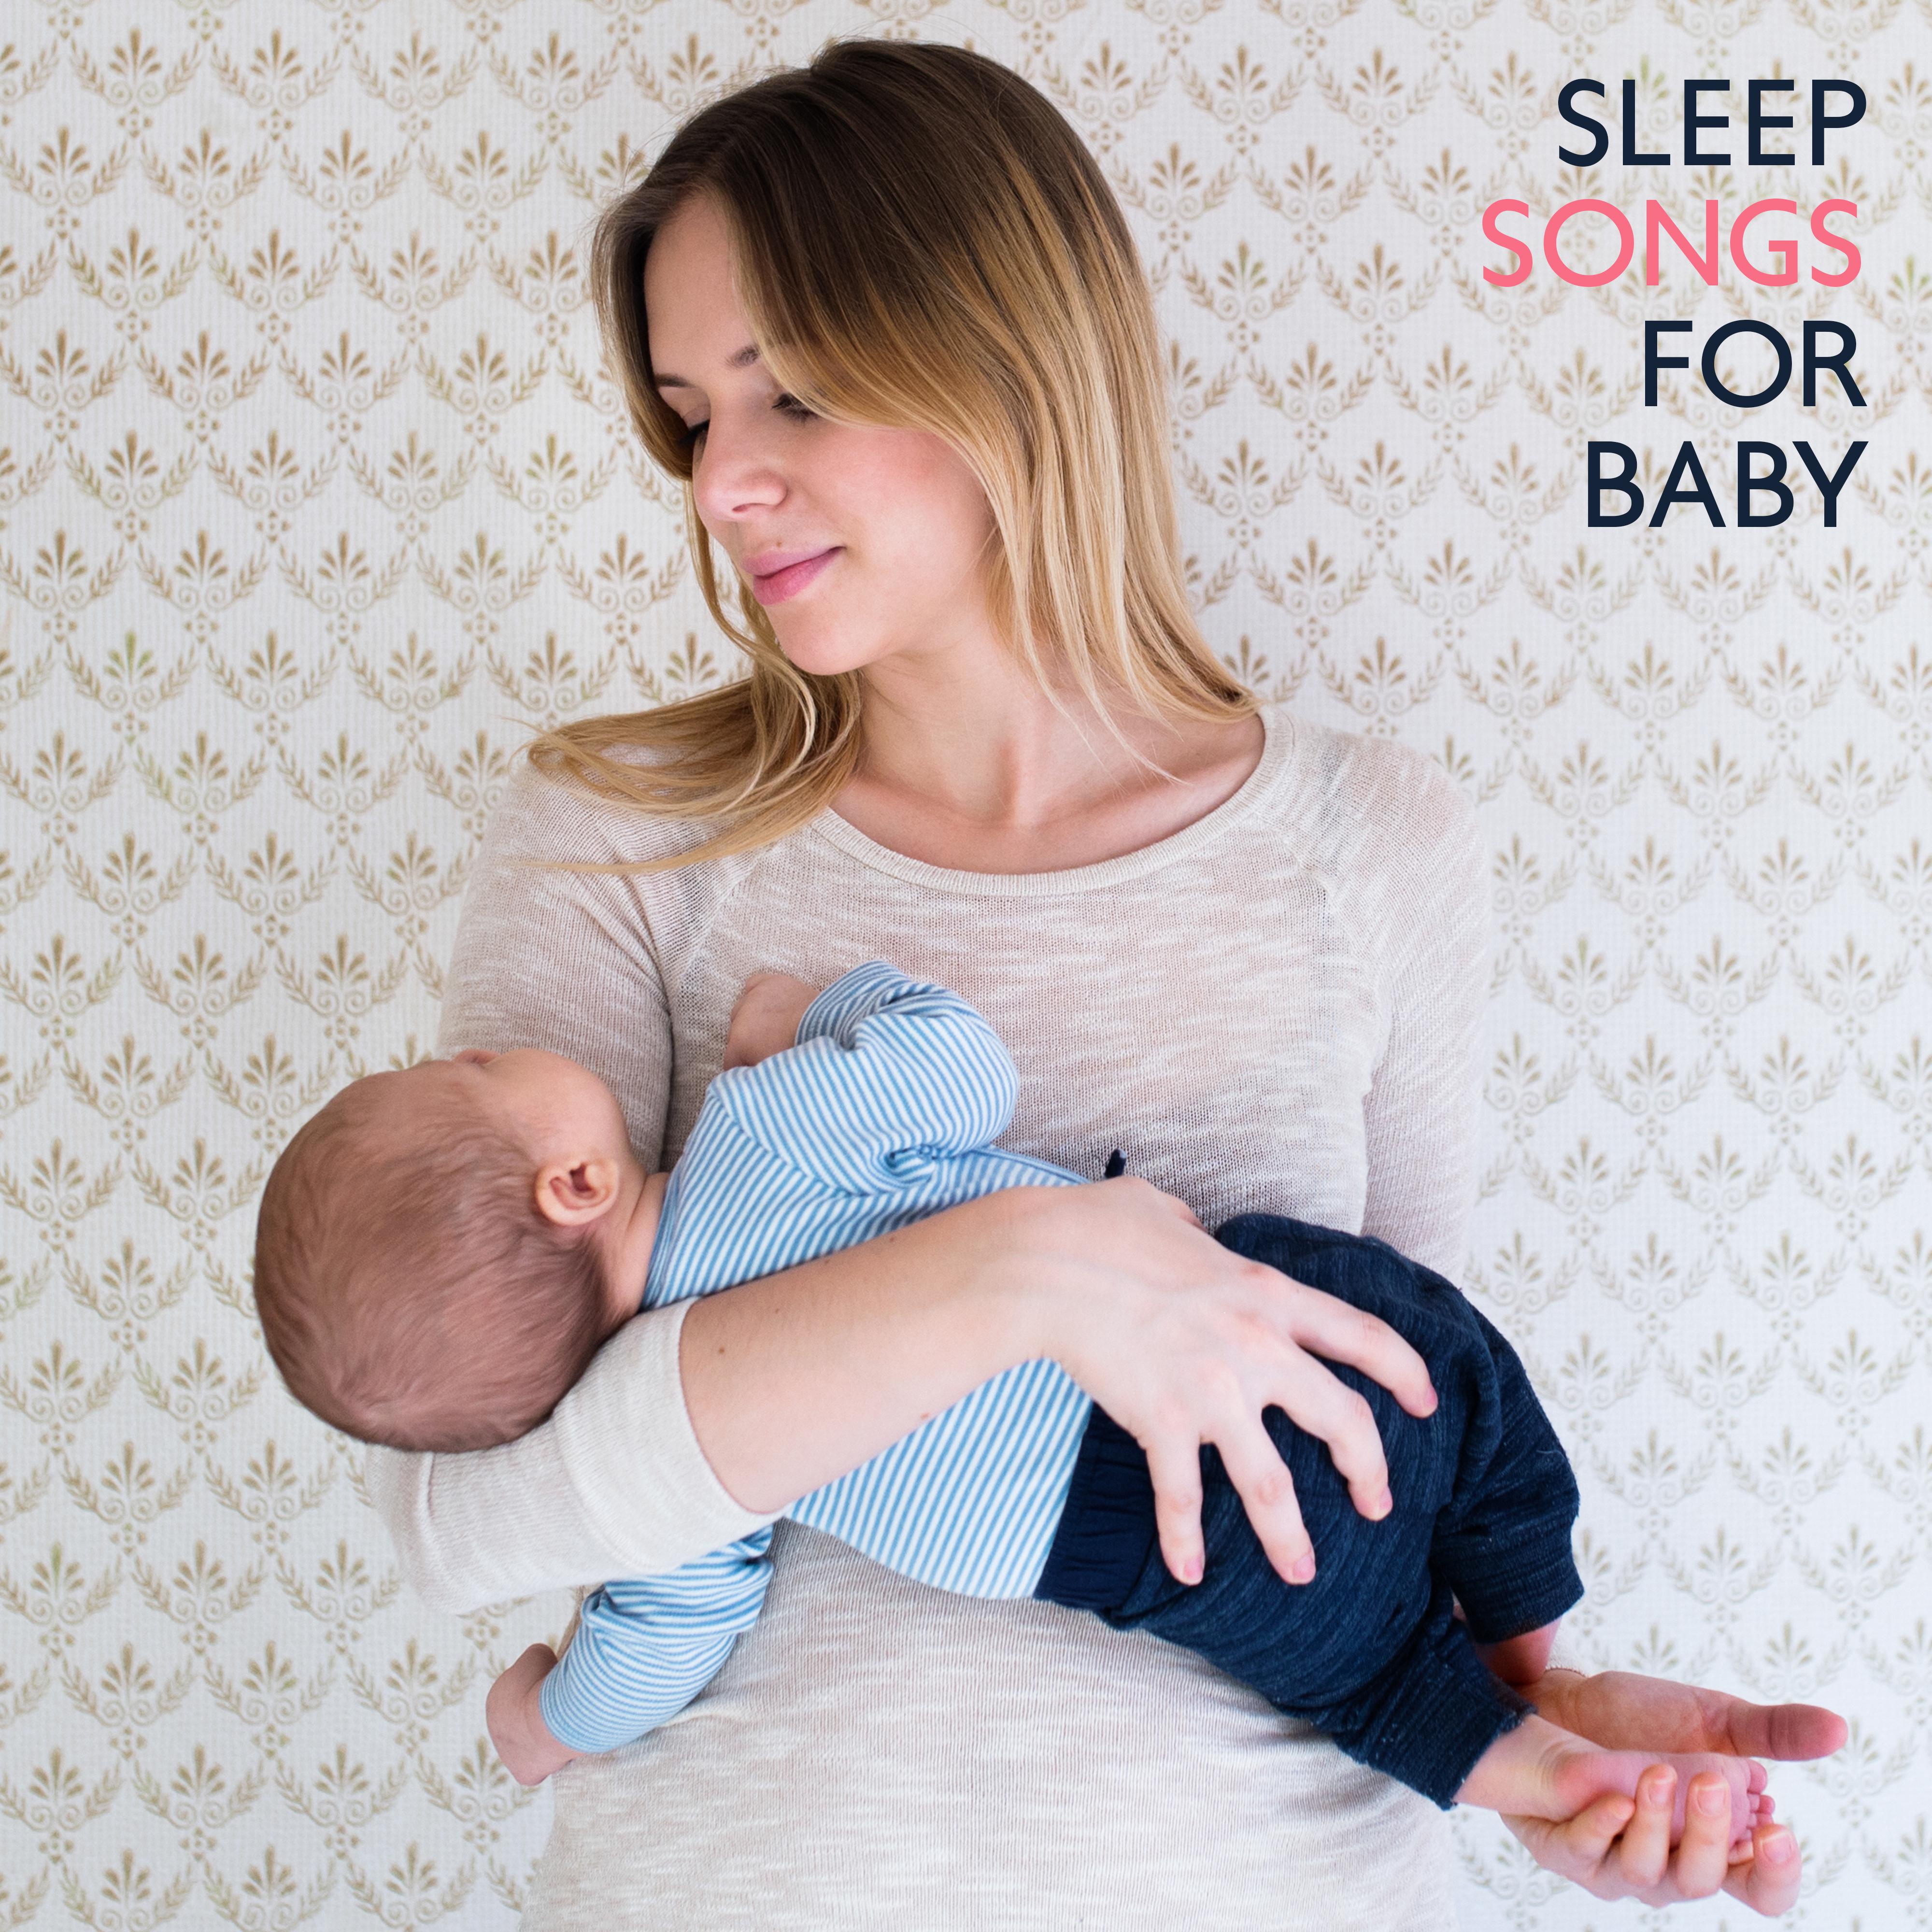 Sleep Songs for Baby – Soothing Nature Sounds at Night, Calming Lullabies, Peaceful Sleep, Singing Birds, Pure Therapy, Calm Down